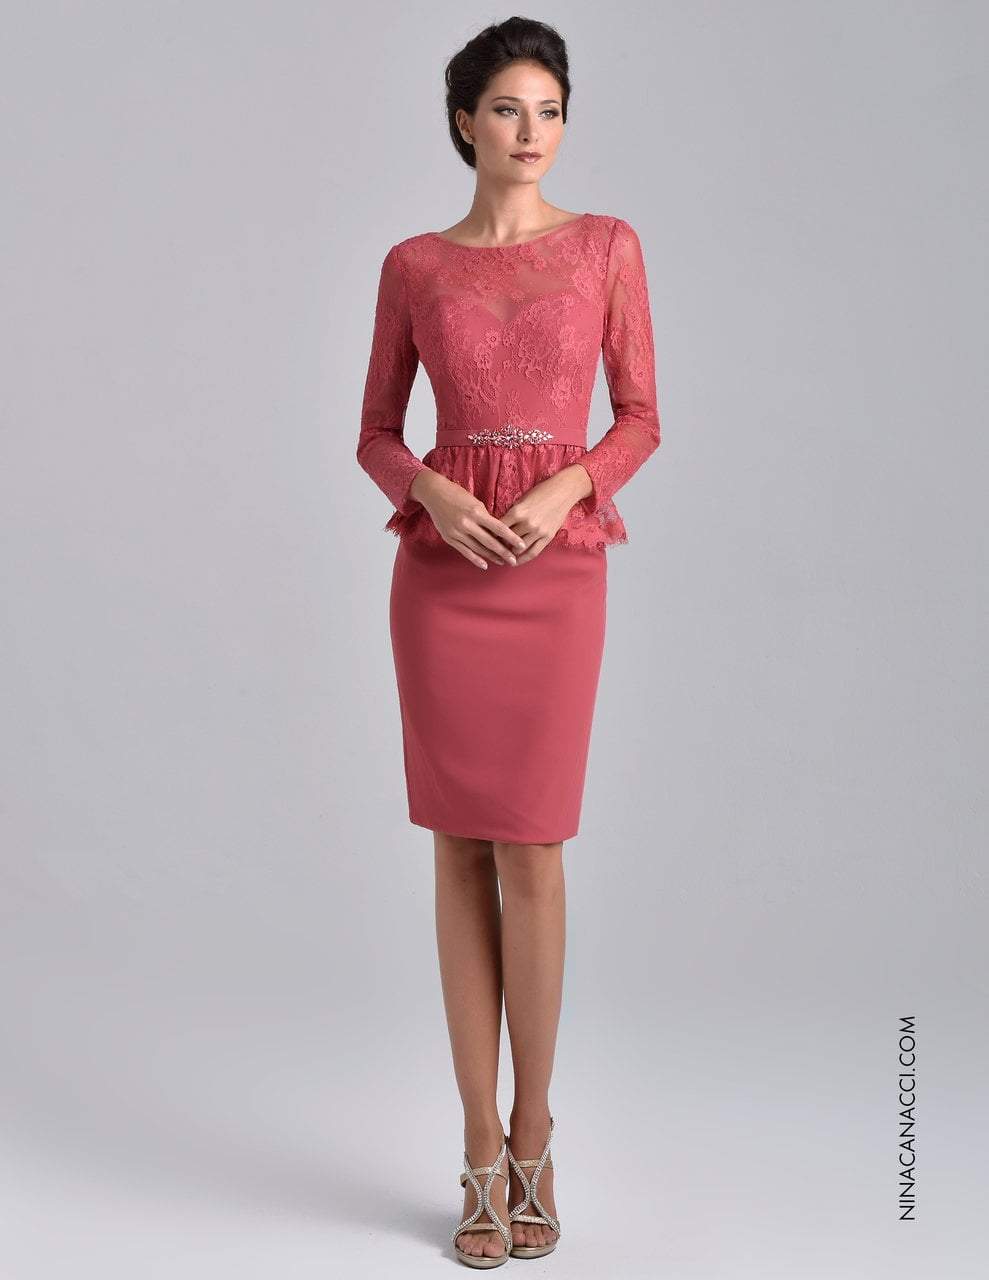 Nina Canacci M221 is a stunning short pencil skirt knee length cocktail dress. featuring a sheer lace illusion high boat neckline with 3/4 long lace sleeves. three-quarter sleeves, paired with a keyhole back accented with a peplum beaded waist. Eyelash lace hem ruffle around the waist to flatter any figure! Available Sizes: 6, 8, 10  Available Colors: Dark Rose